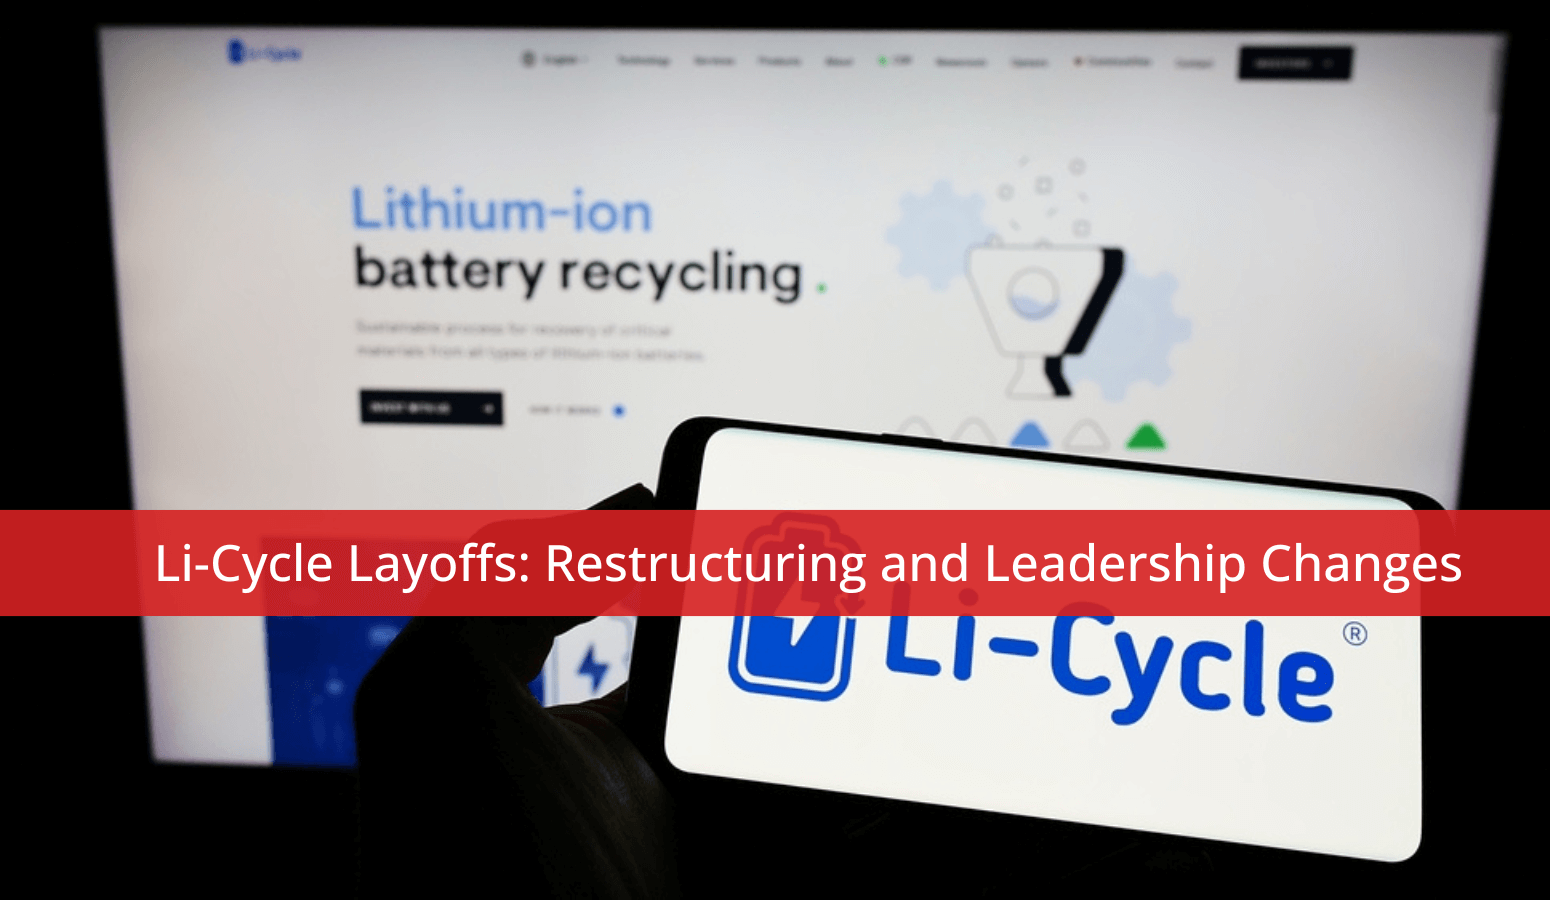 Featured image for “Li-Cycle Layoffs: Restructuring and Leadership Changes”